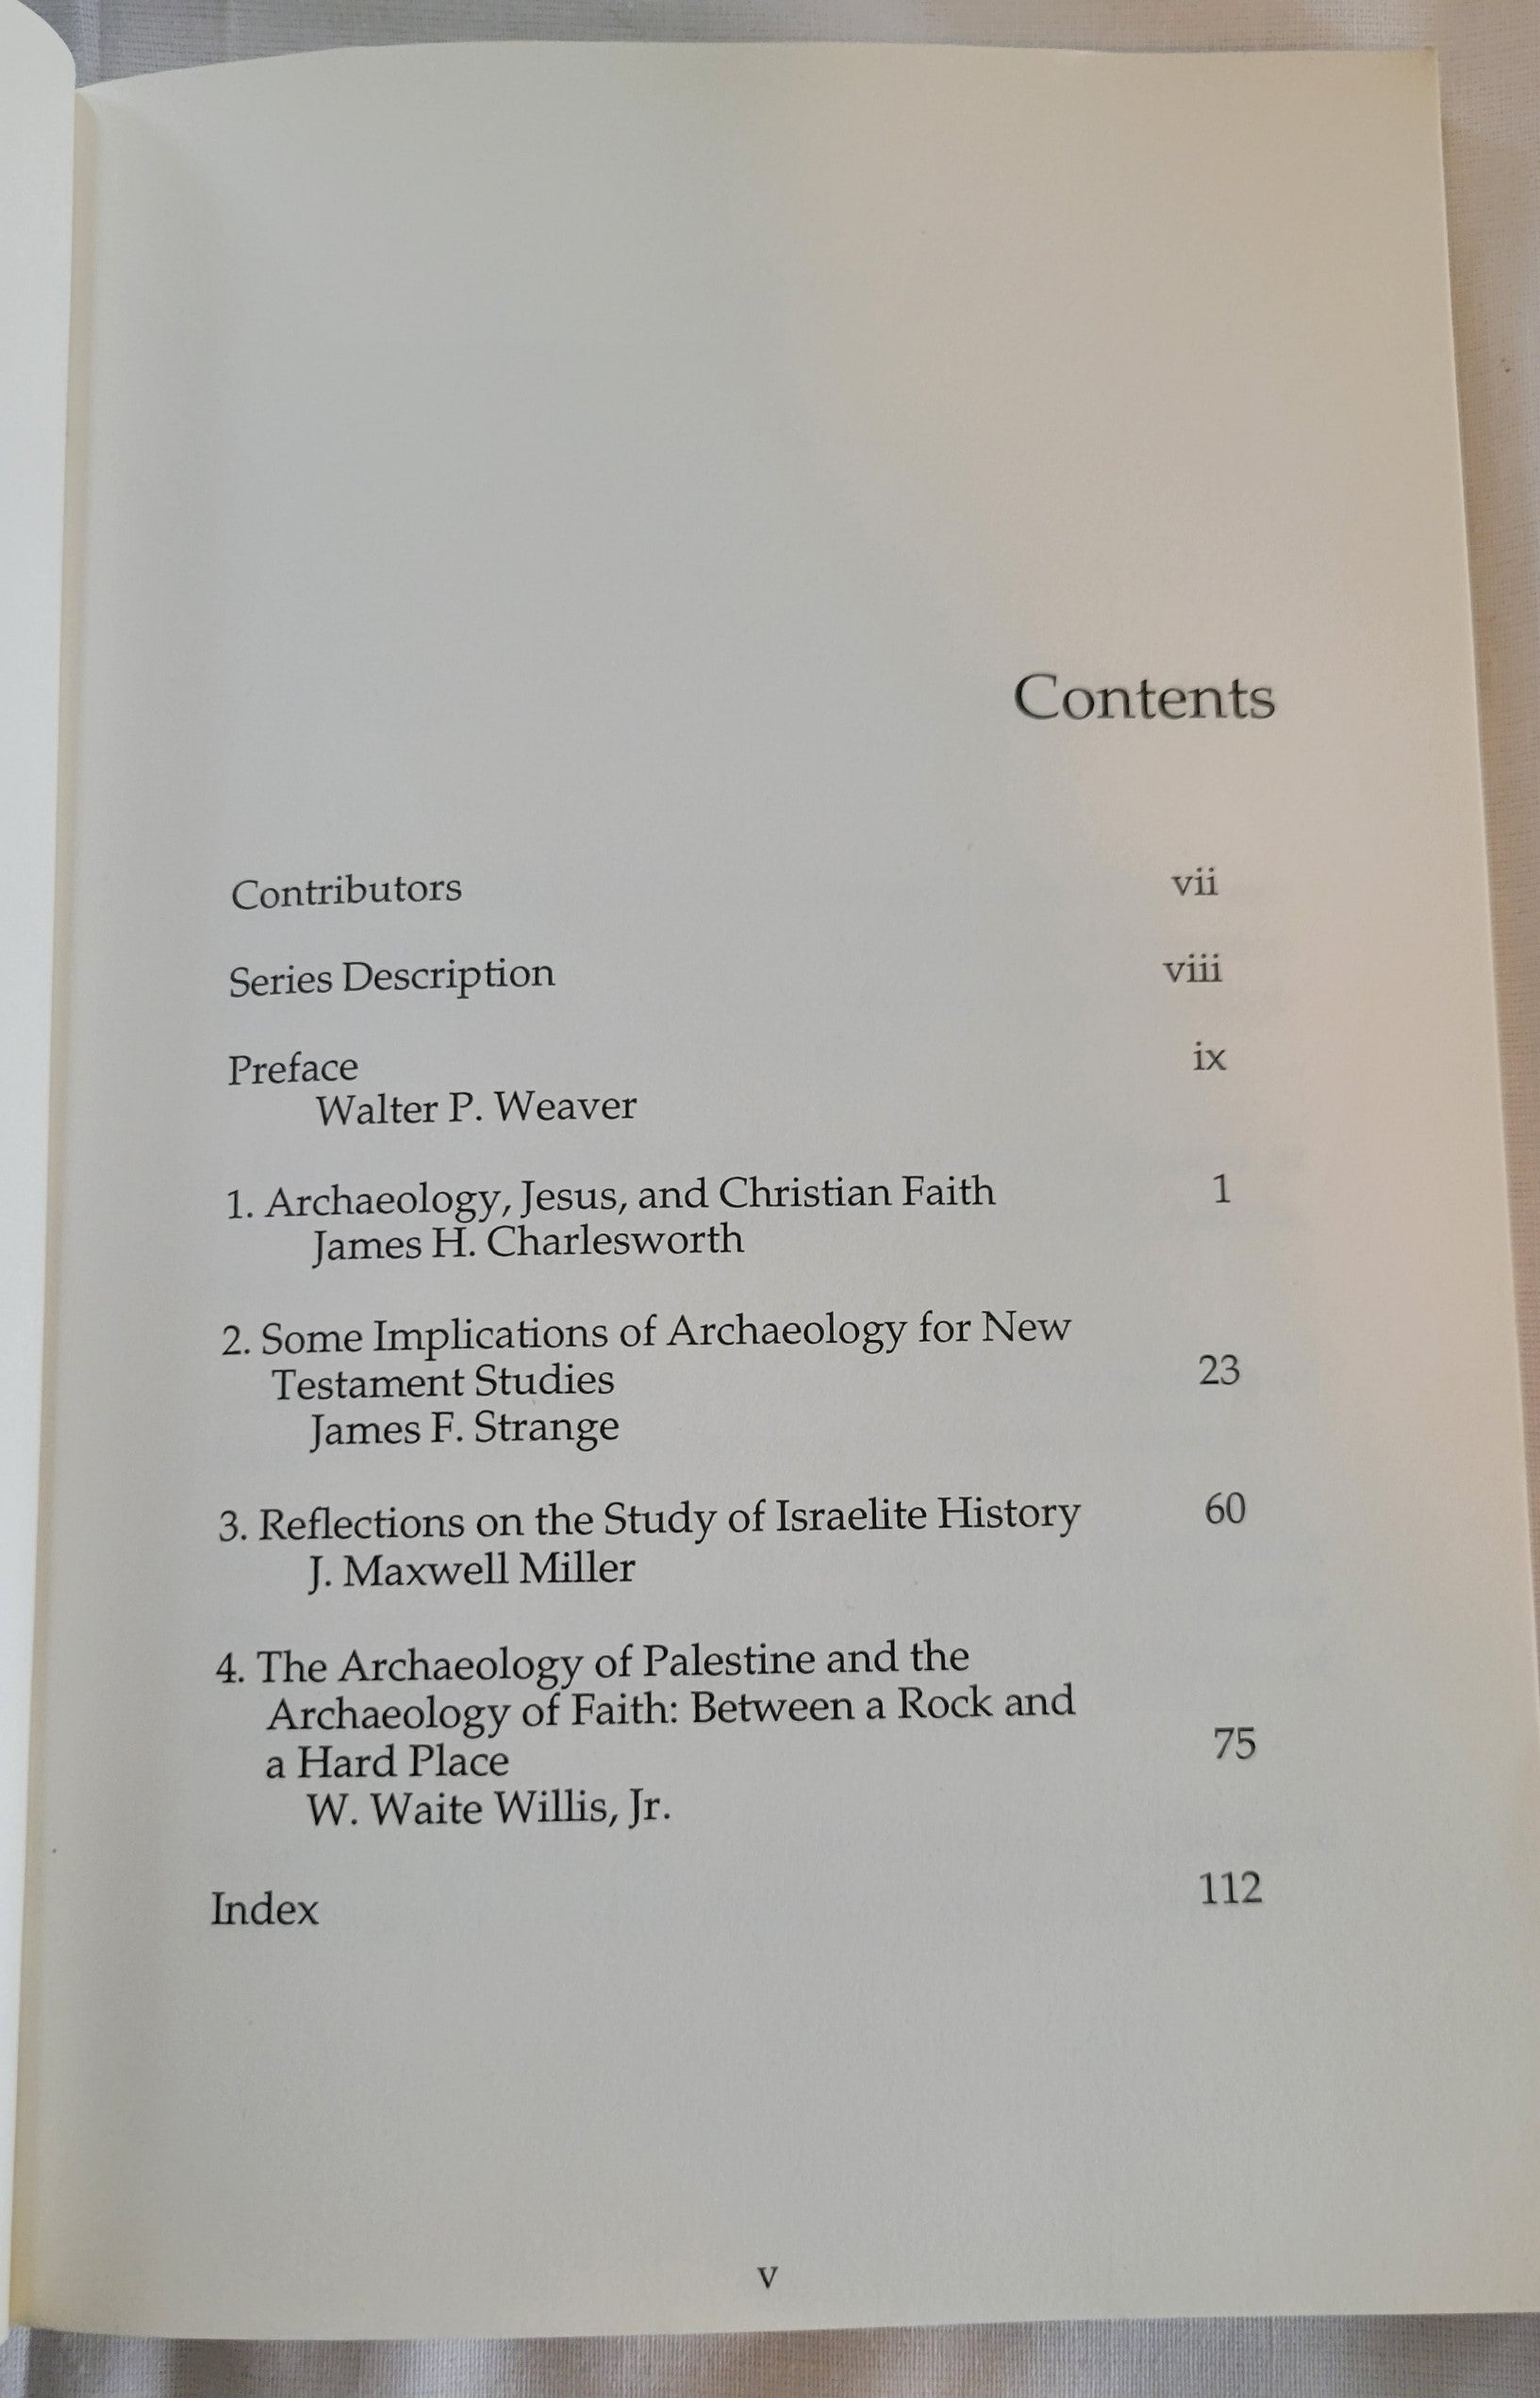 Used book for sale “What Has Archaeology to do with Faith?” edited by James H. Charlesworth and Walter P. Weaver. Table of contents.